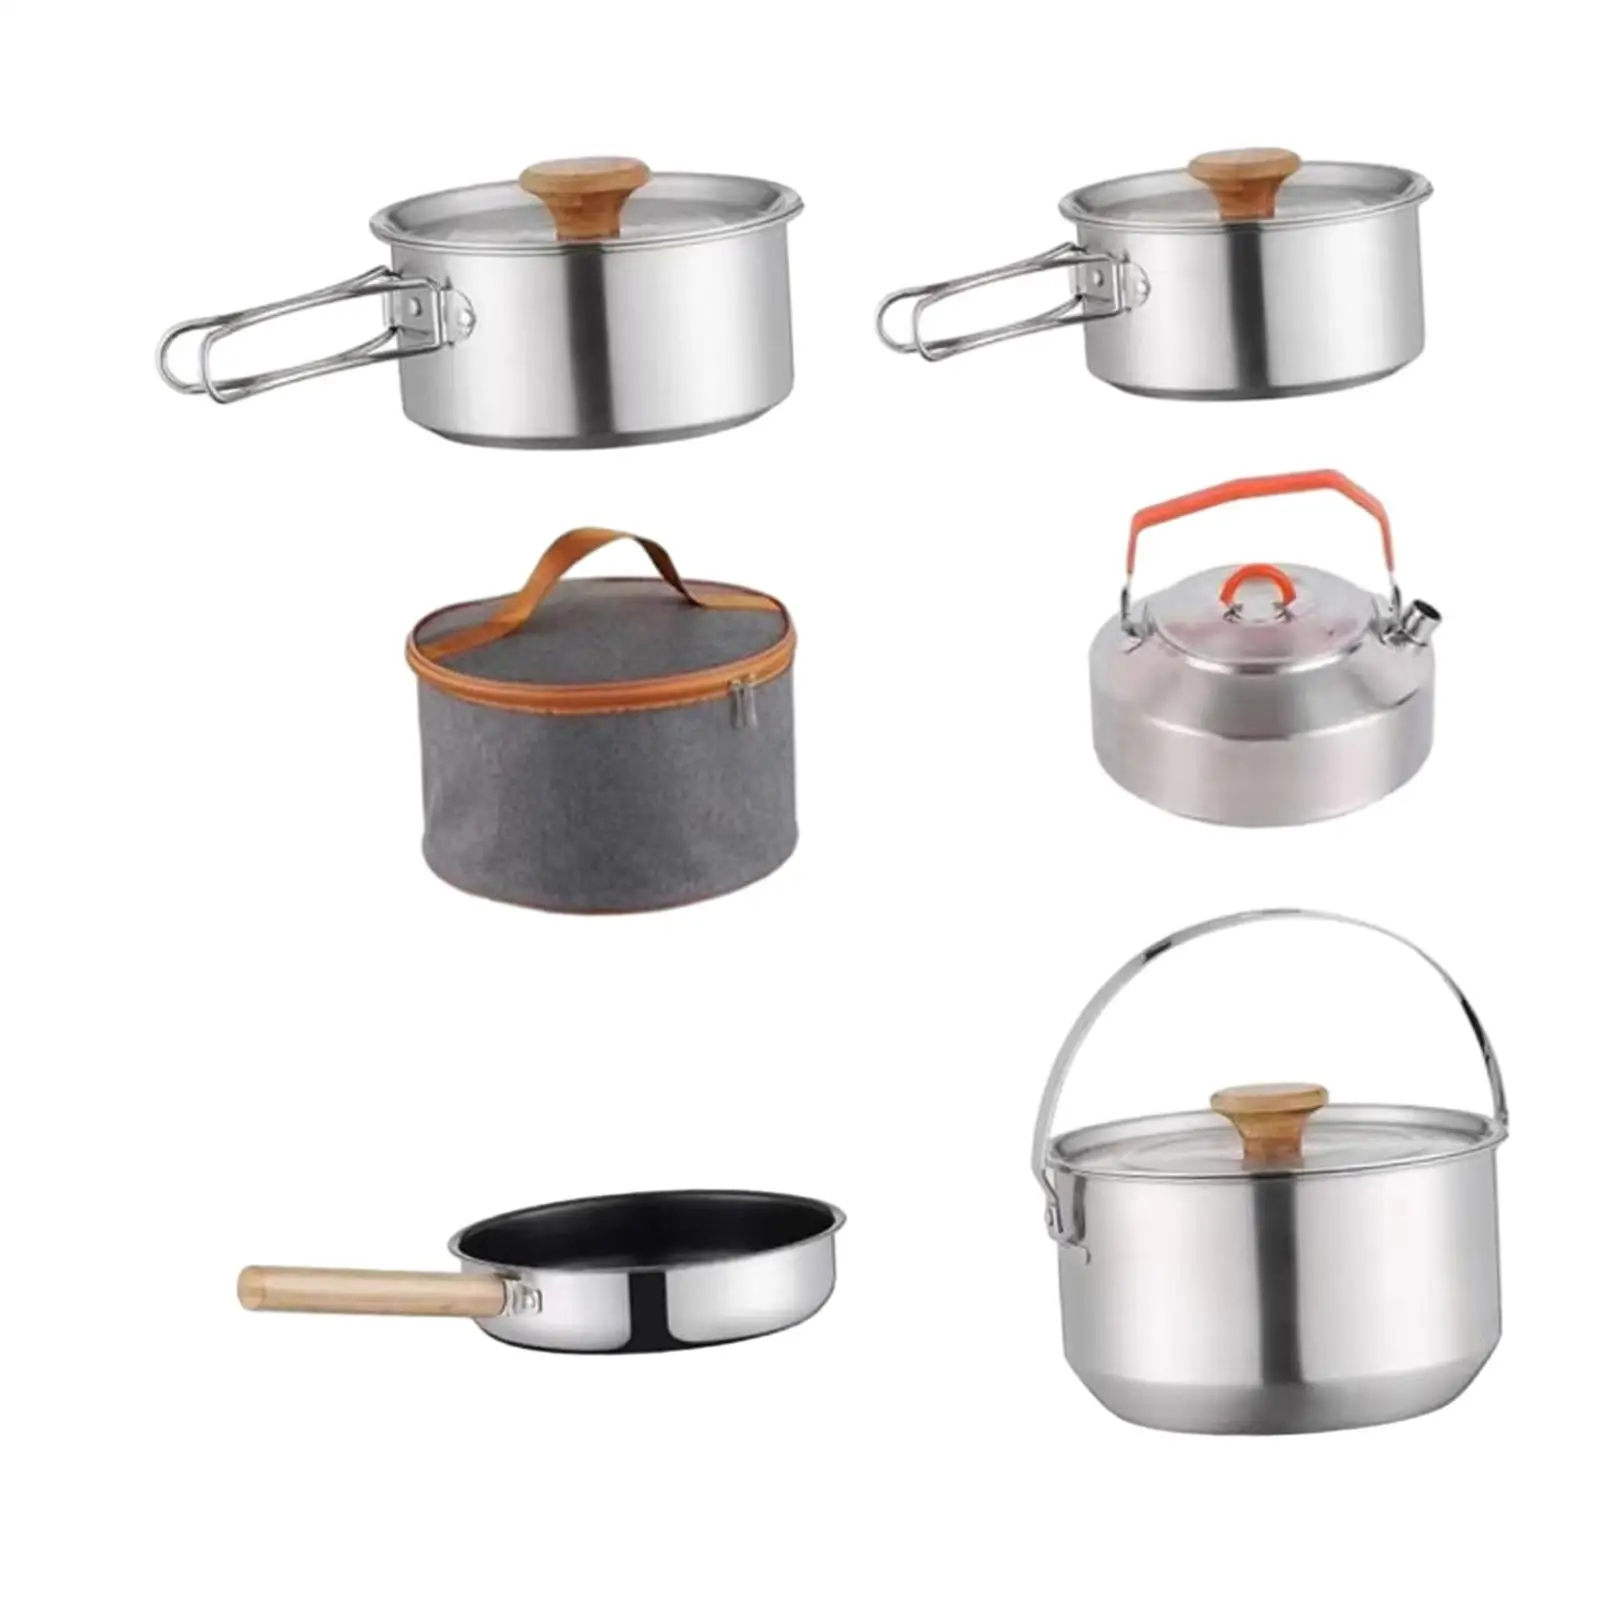 Camping Cookware Kit Cookset Hanging Pot Portable Outdoor Pot Cooking Set for Hiking Backpacking Campfire Survival Picnic